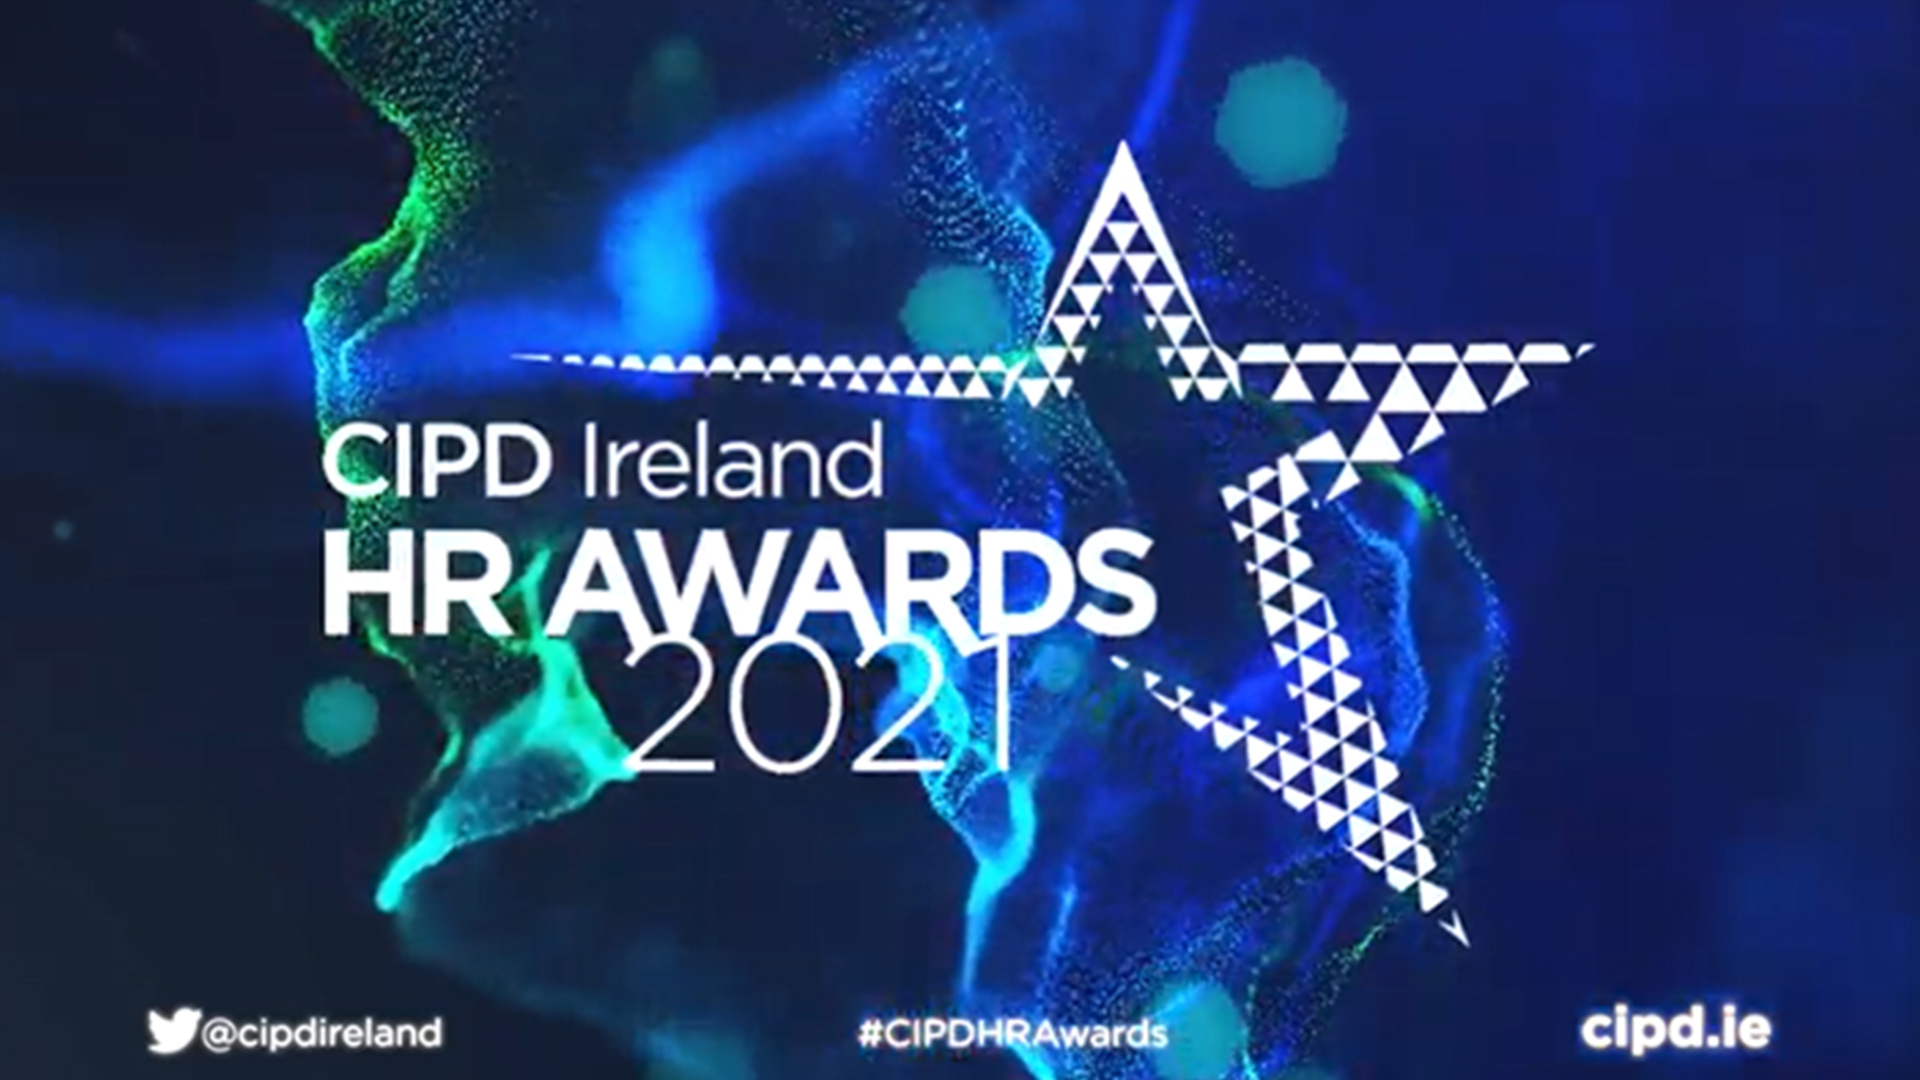 The most prestigious HR awards in Ireland, the annual CIPD Ireland HR Awards showcases the best in our HR and people profession. Hosed by Kathryn Thomas